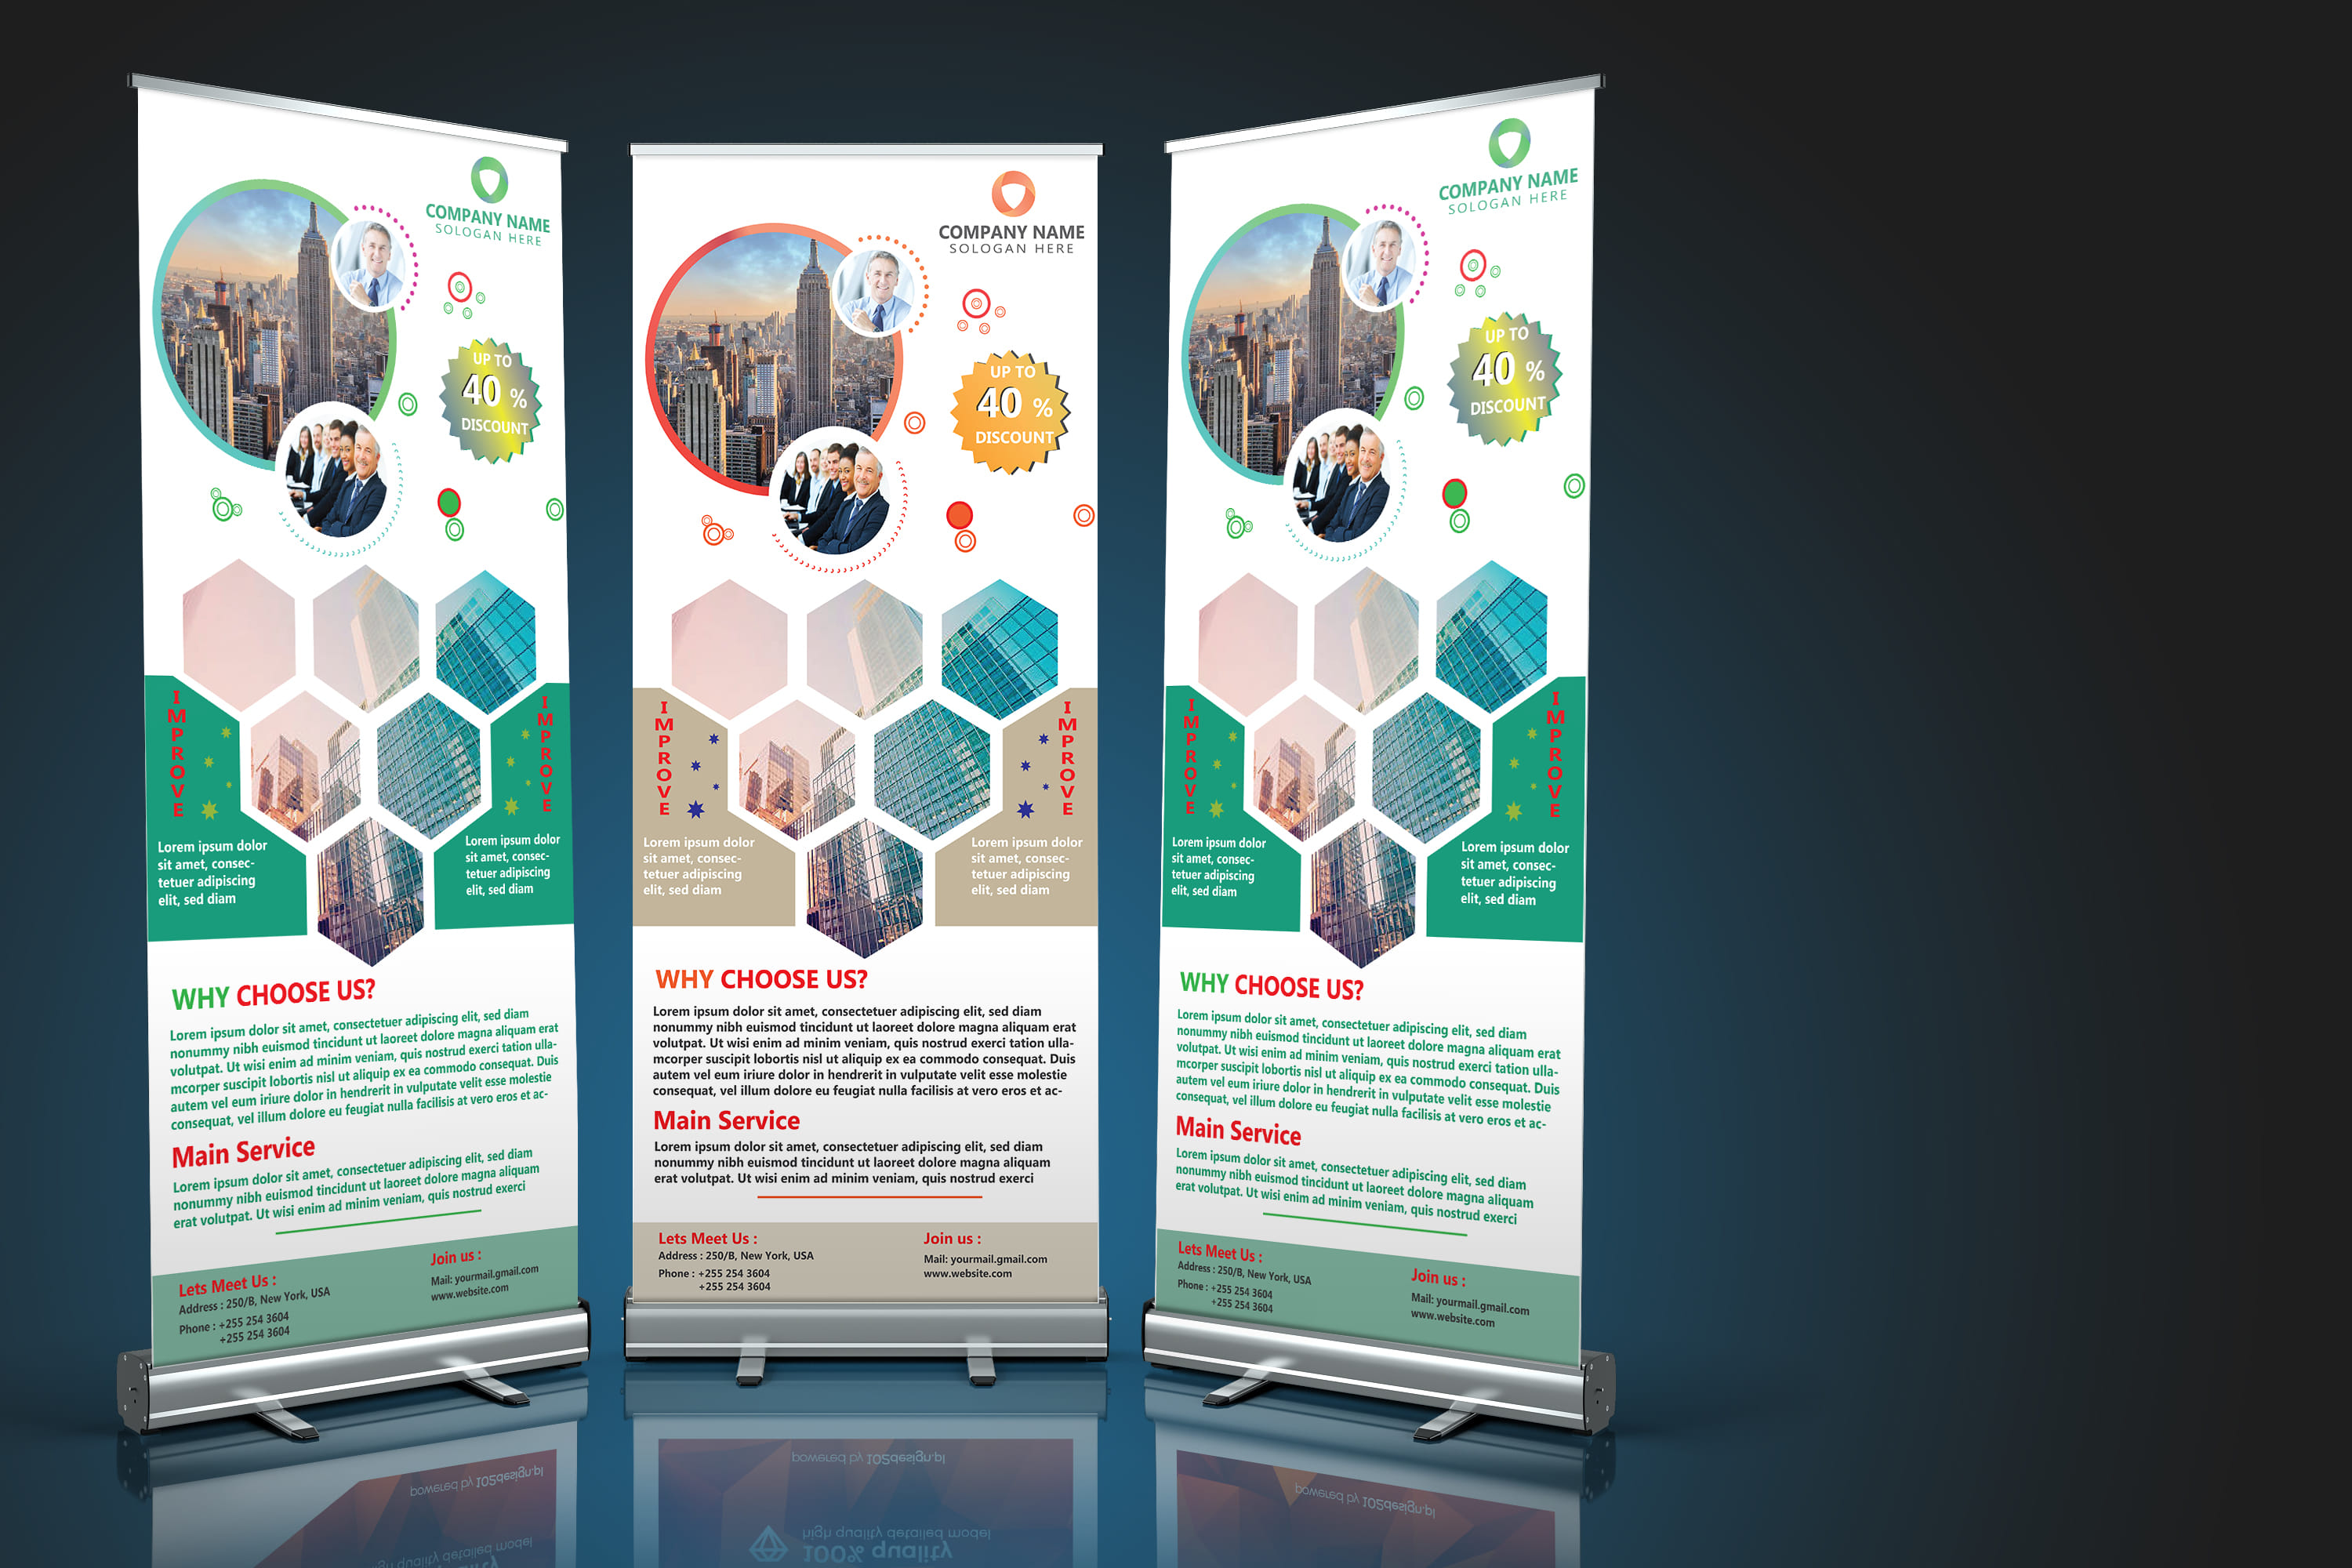 Design Roll Up Pop Up Retractable Banner And X Stand Banner By Design Orb